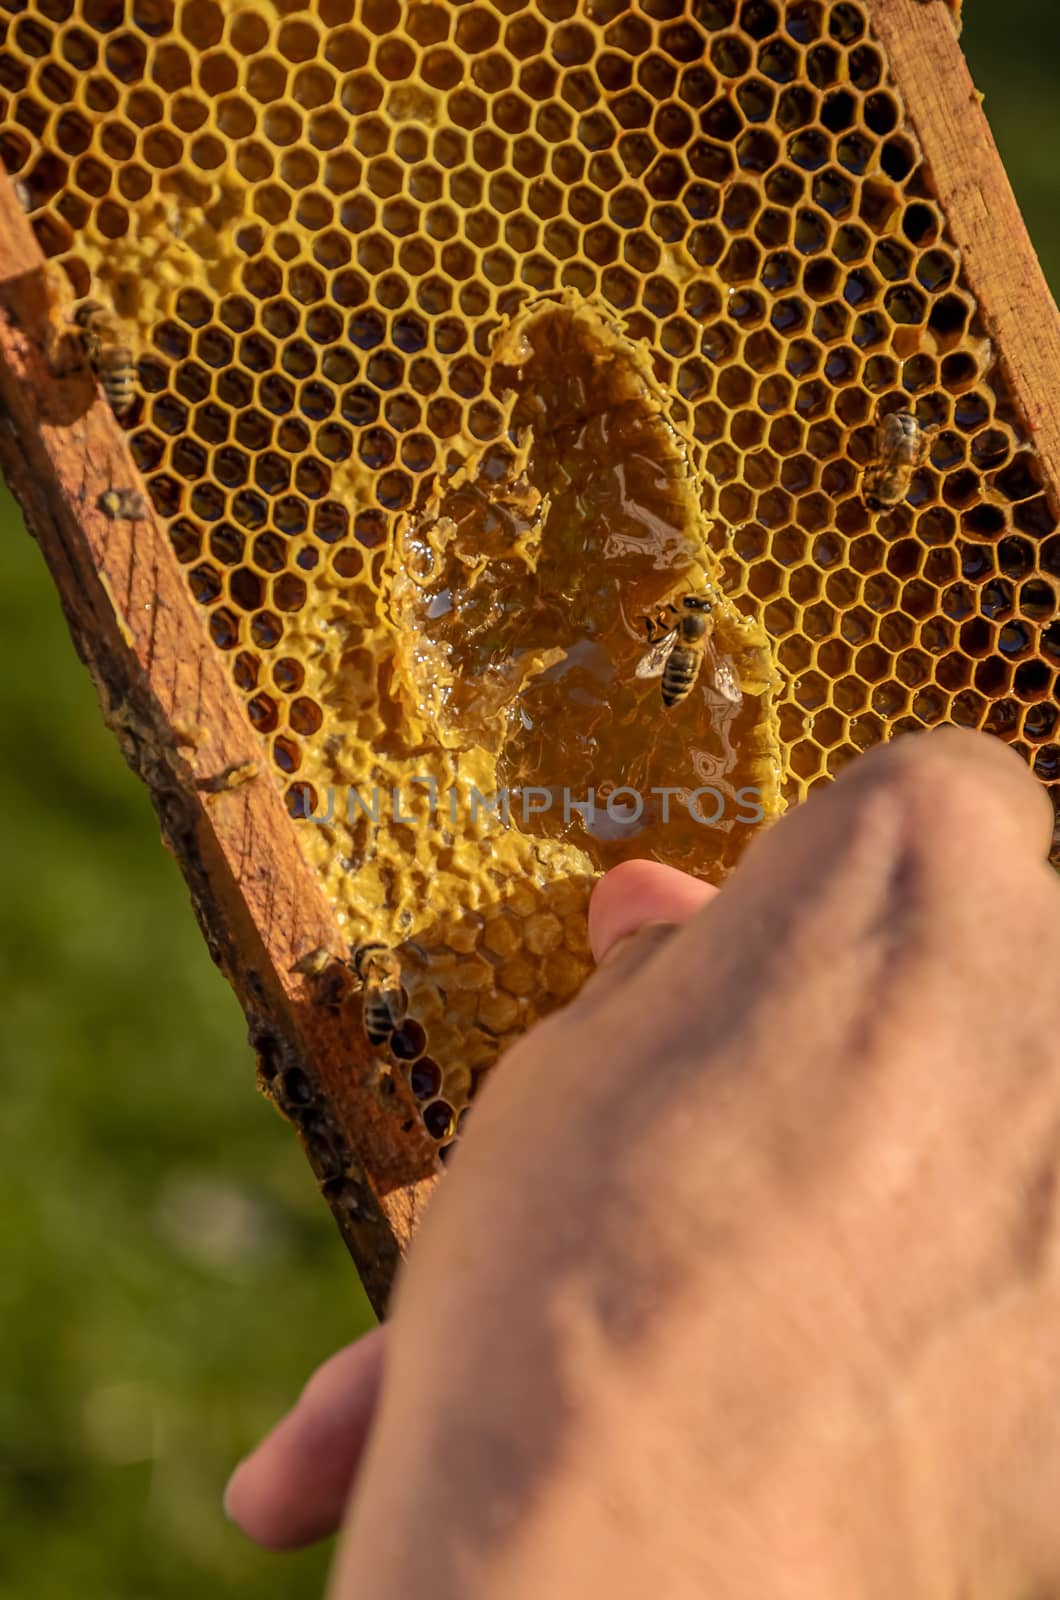 Beekeeper showing honeycomb frame by Attila